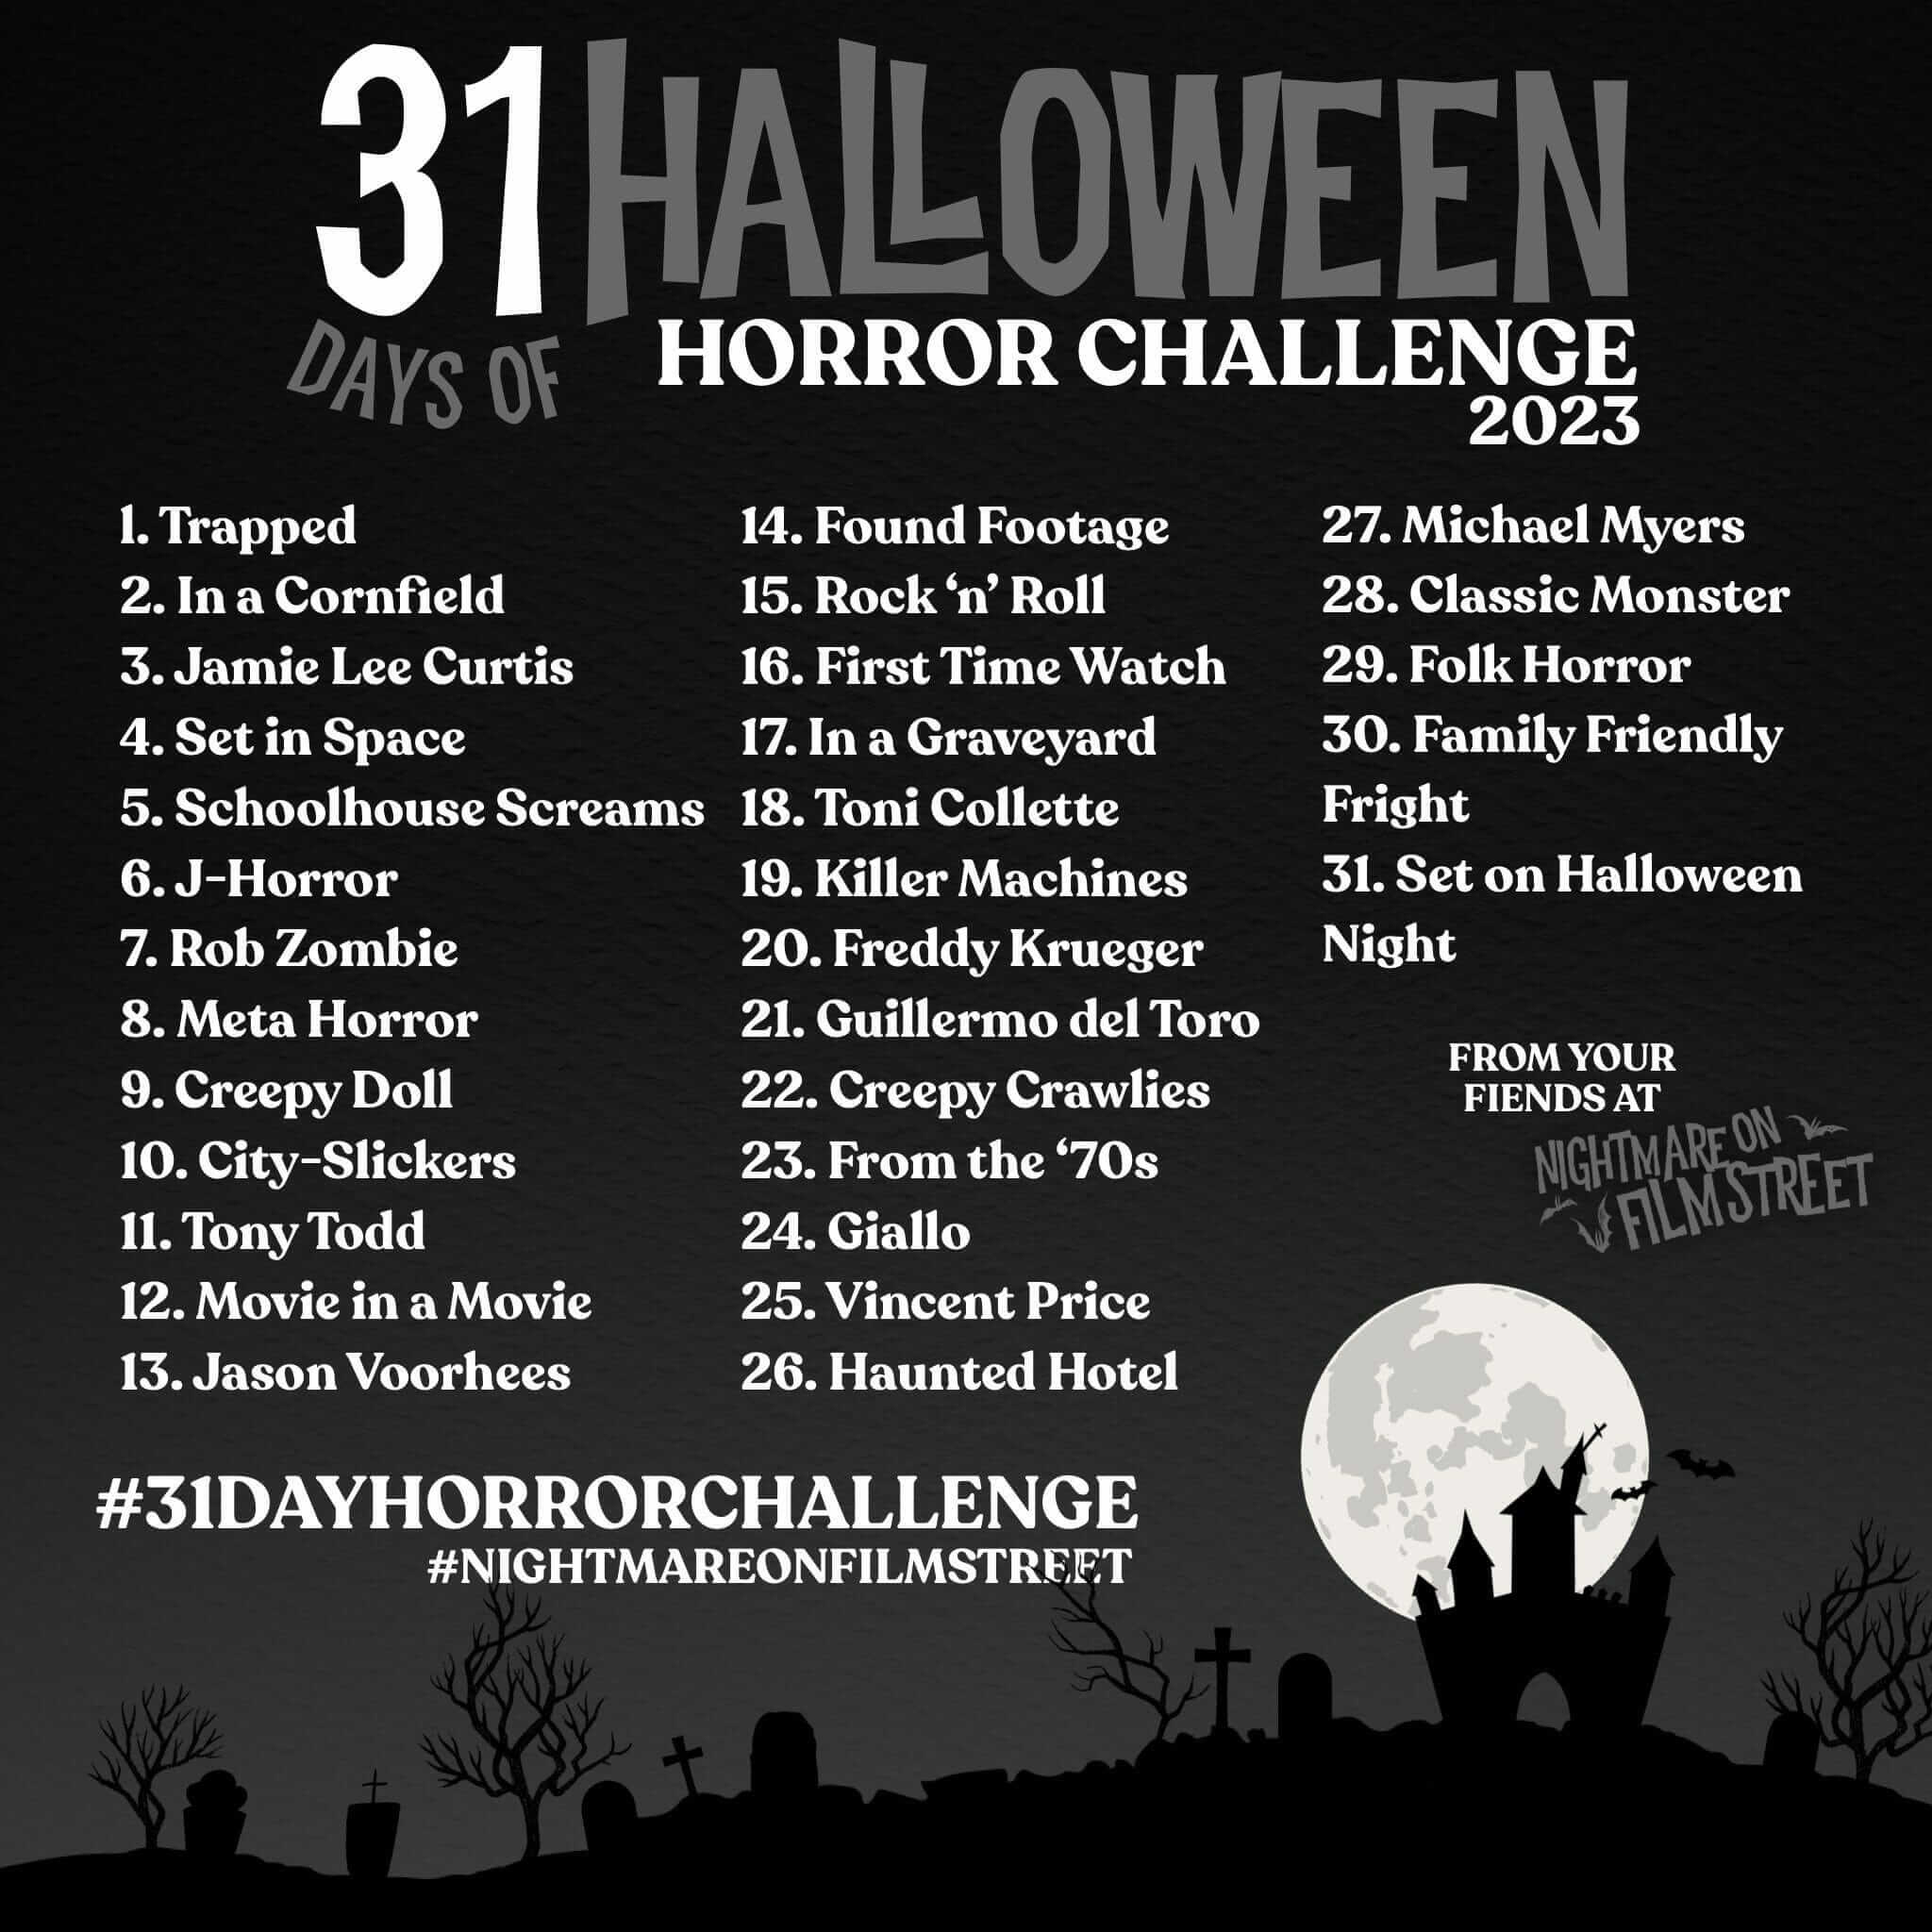 Join the Ultimate Halloween Movie Marathon with the #31DayHorrorChallenge from Nightmare on Film Street 2023